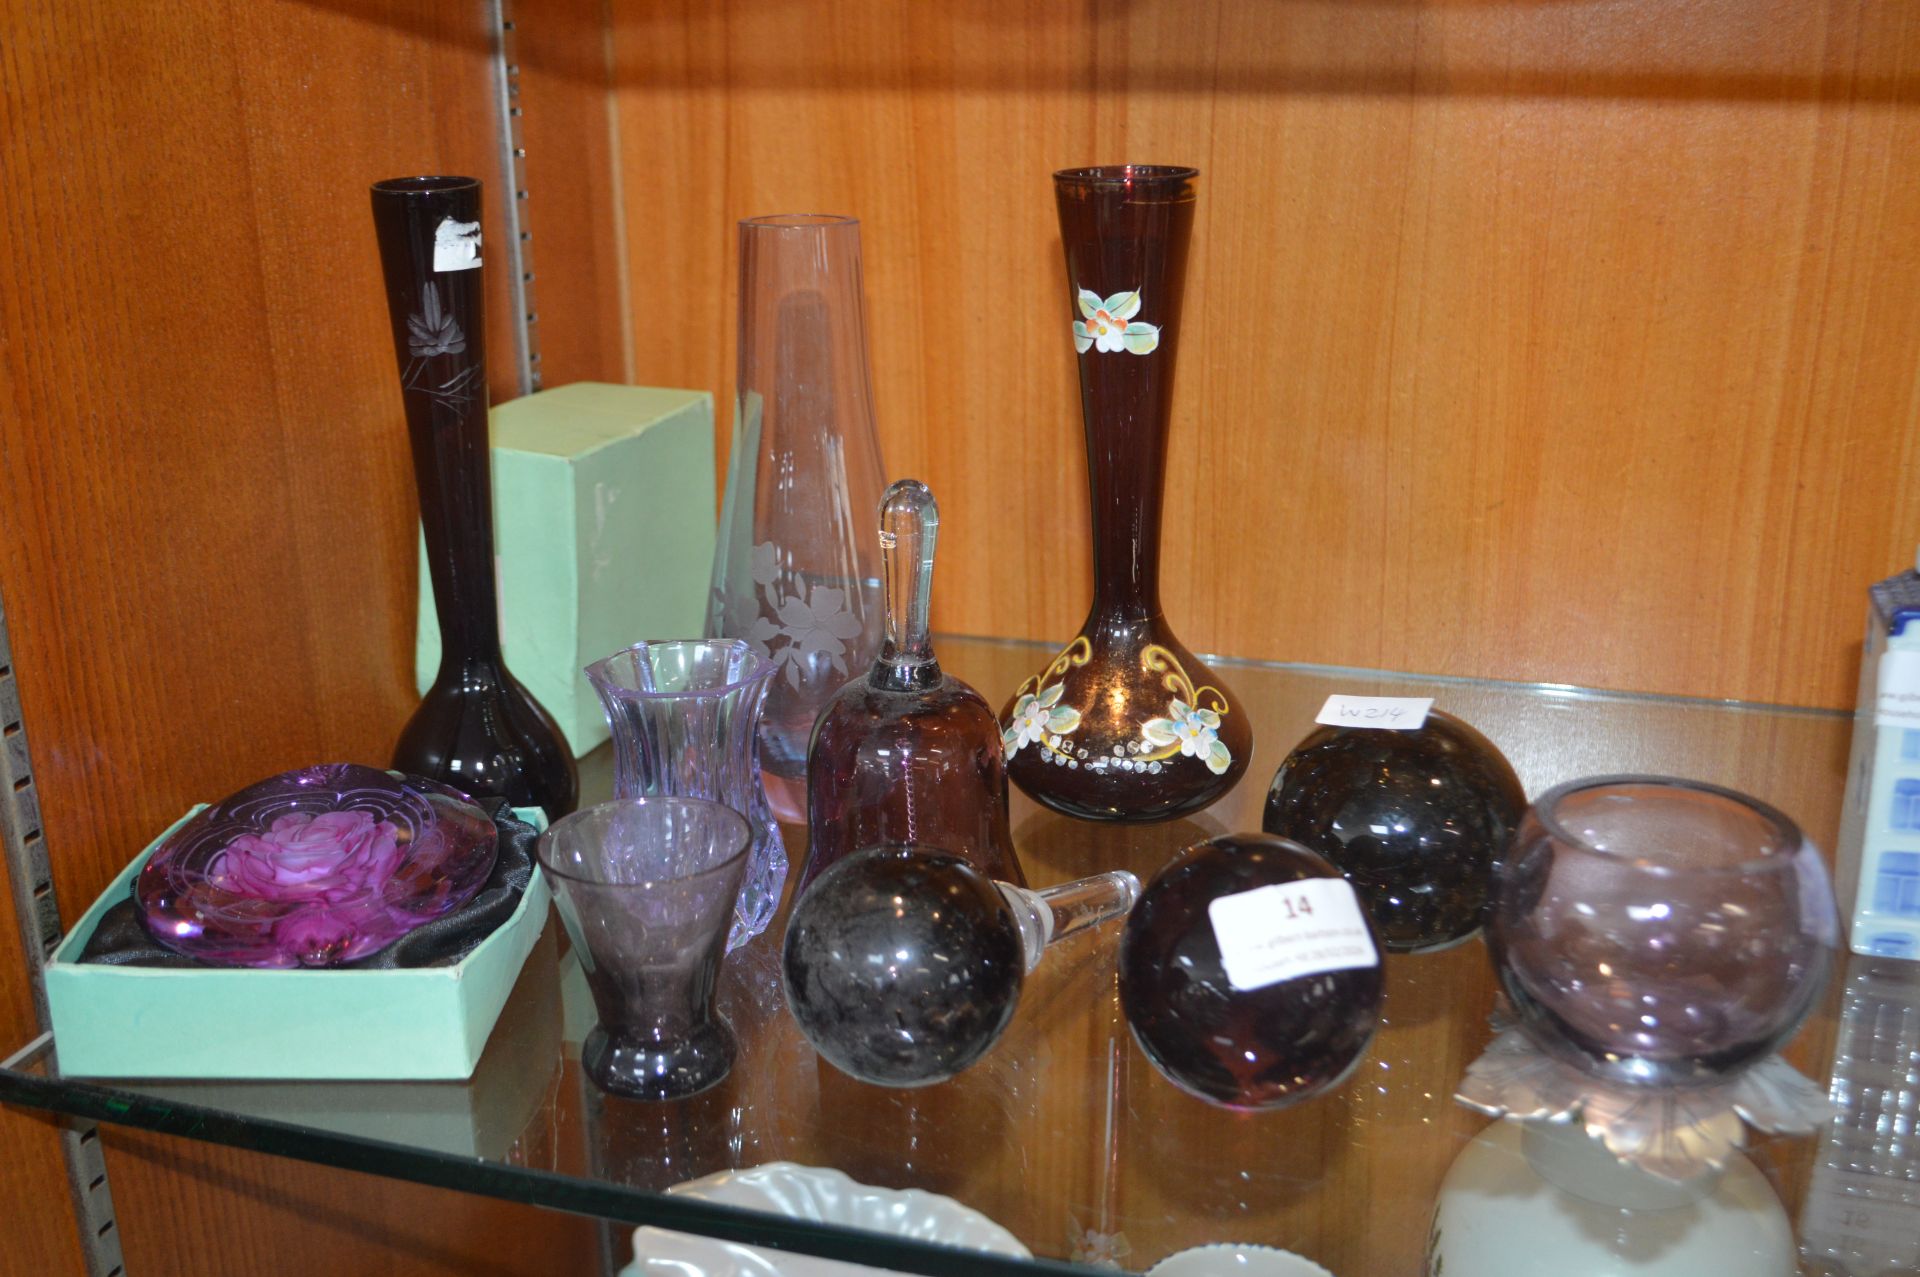 Coloured Glass Paperweights, Vases, etc.